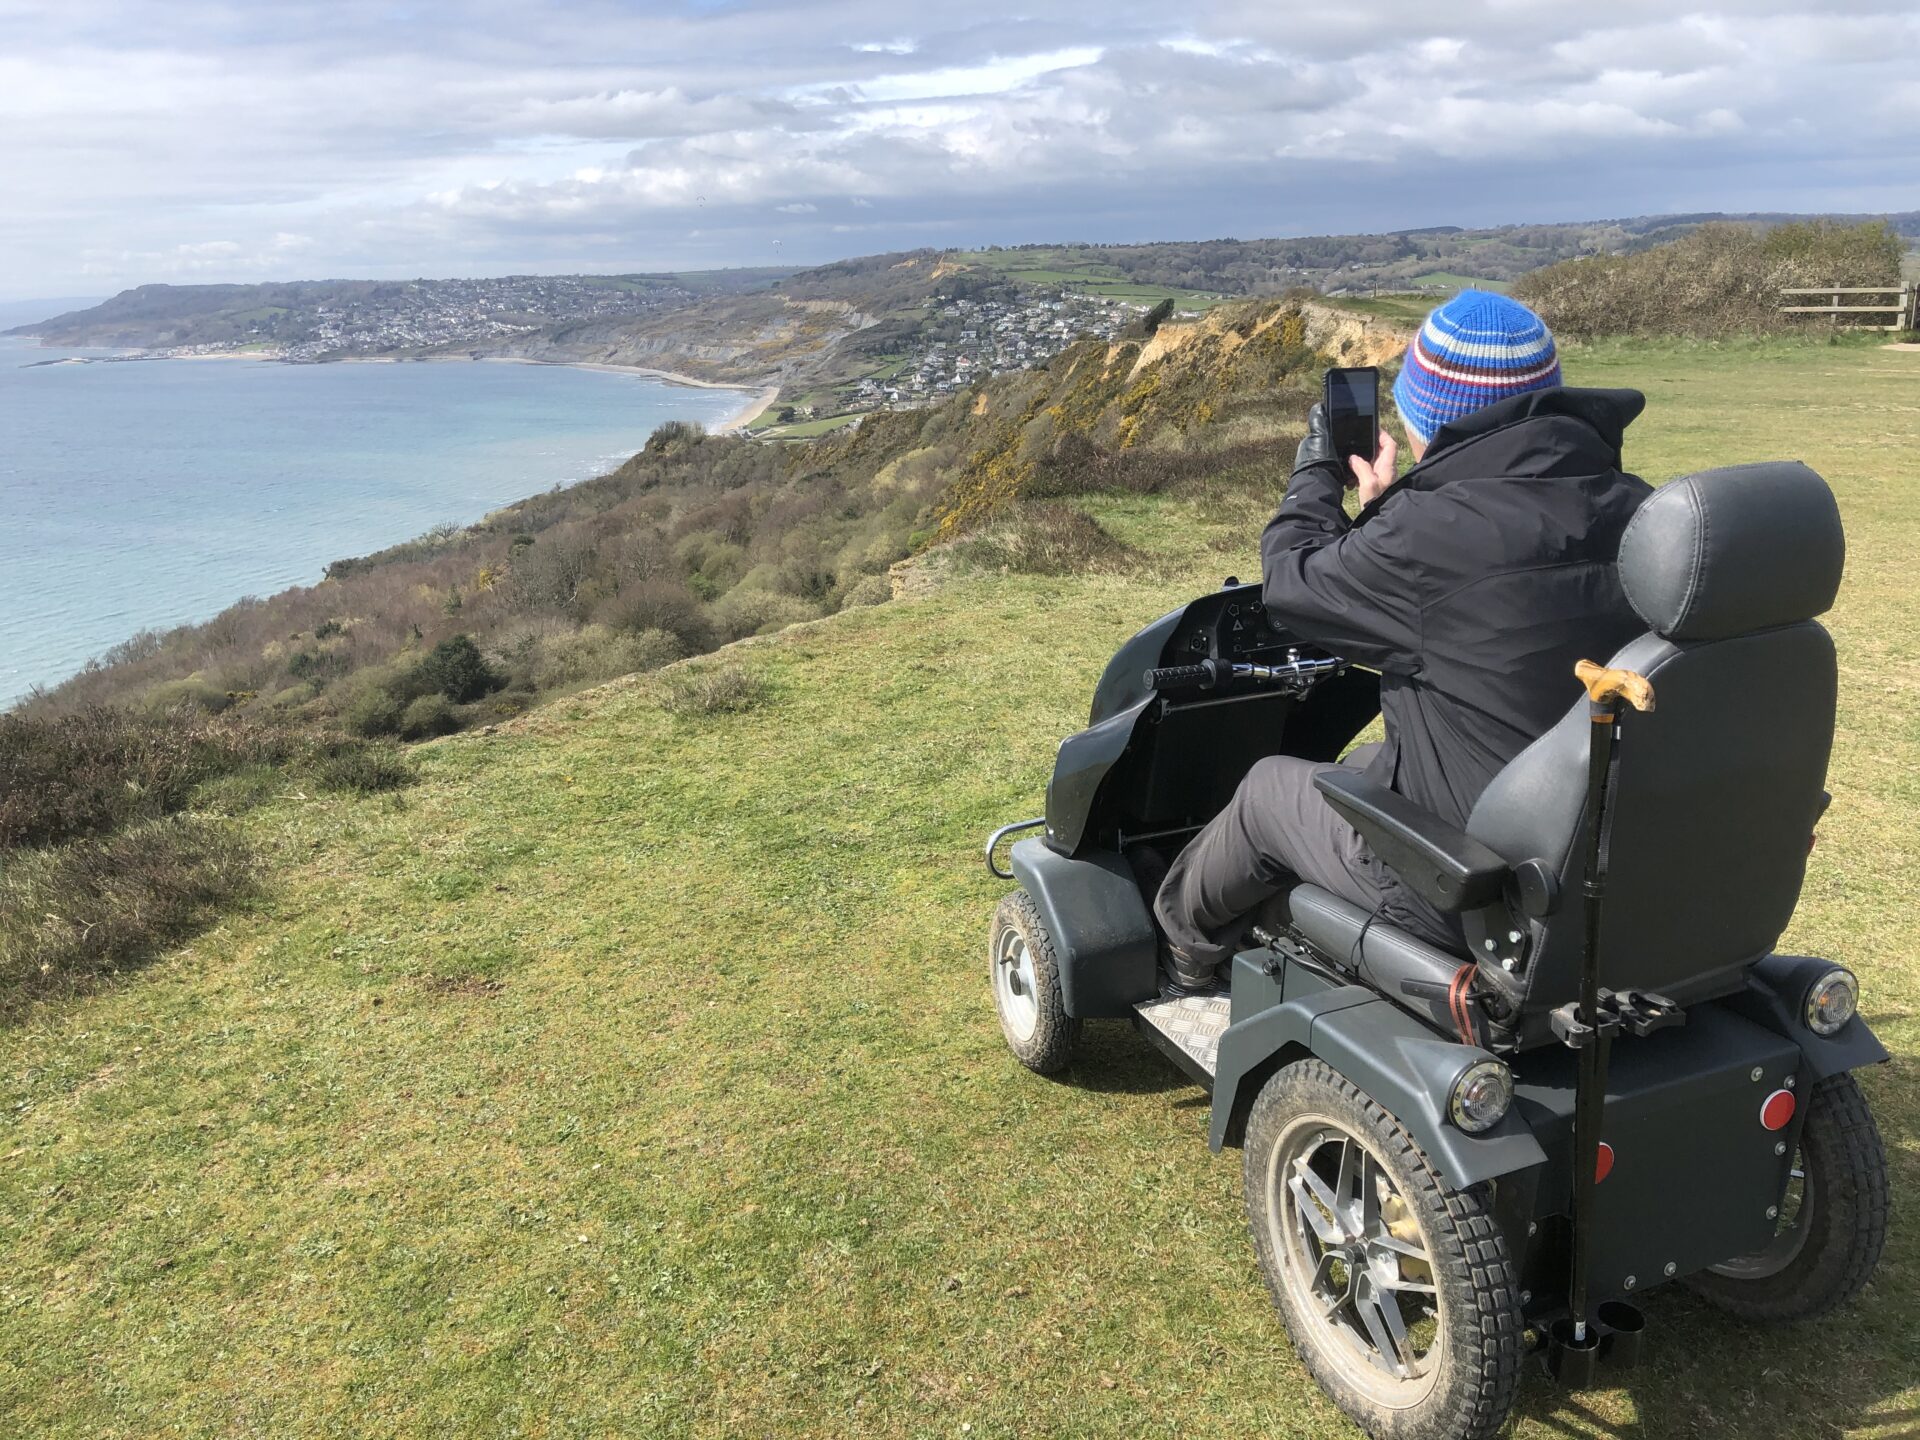 A visitor using an all terrain mobility scooter looks west along the Jurassic Coast towards Lyme Regis